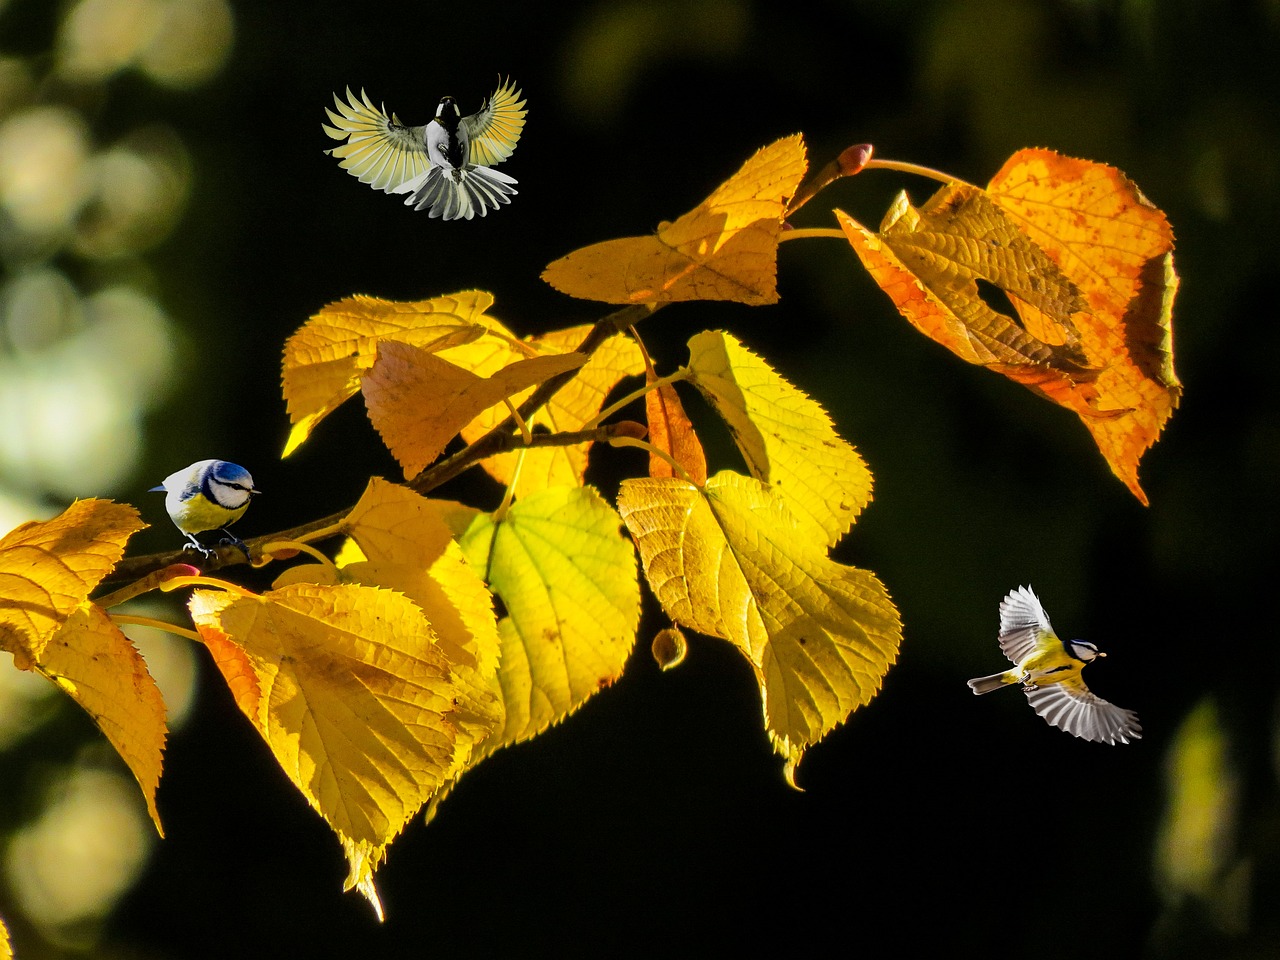 3 yellow birds perched and flying around autumn leaves